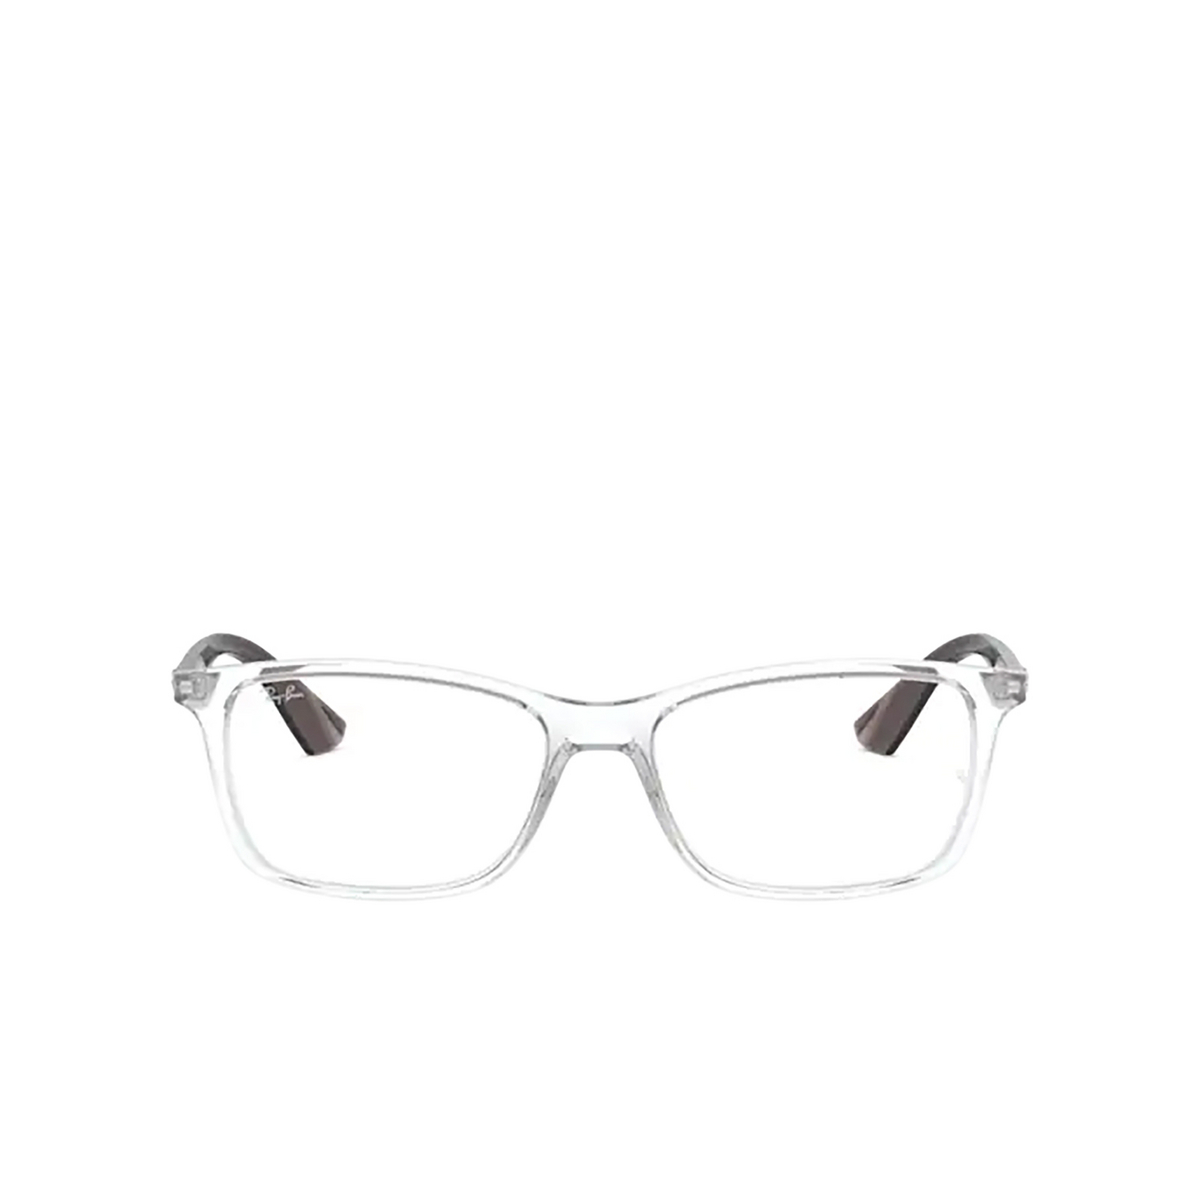 Ray-Ban RX7047 Eyeglasses 5768 Transparent - front view